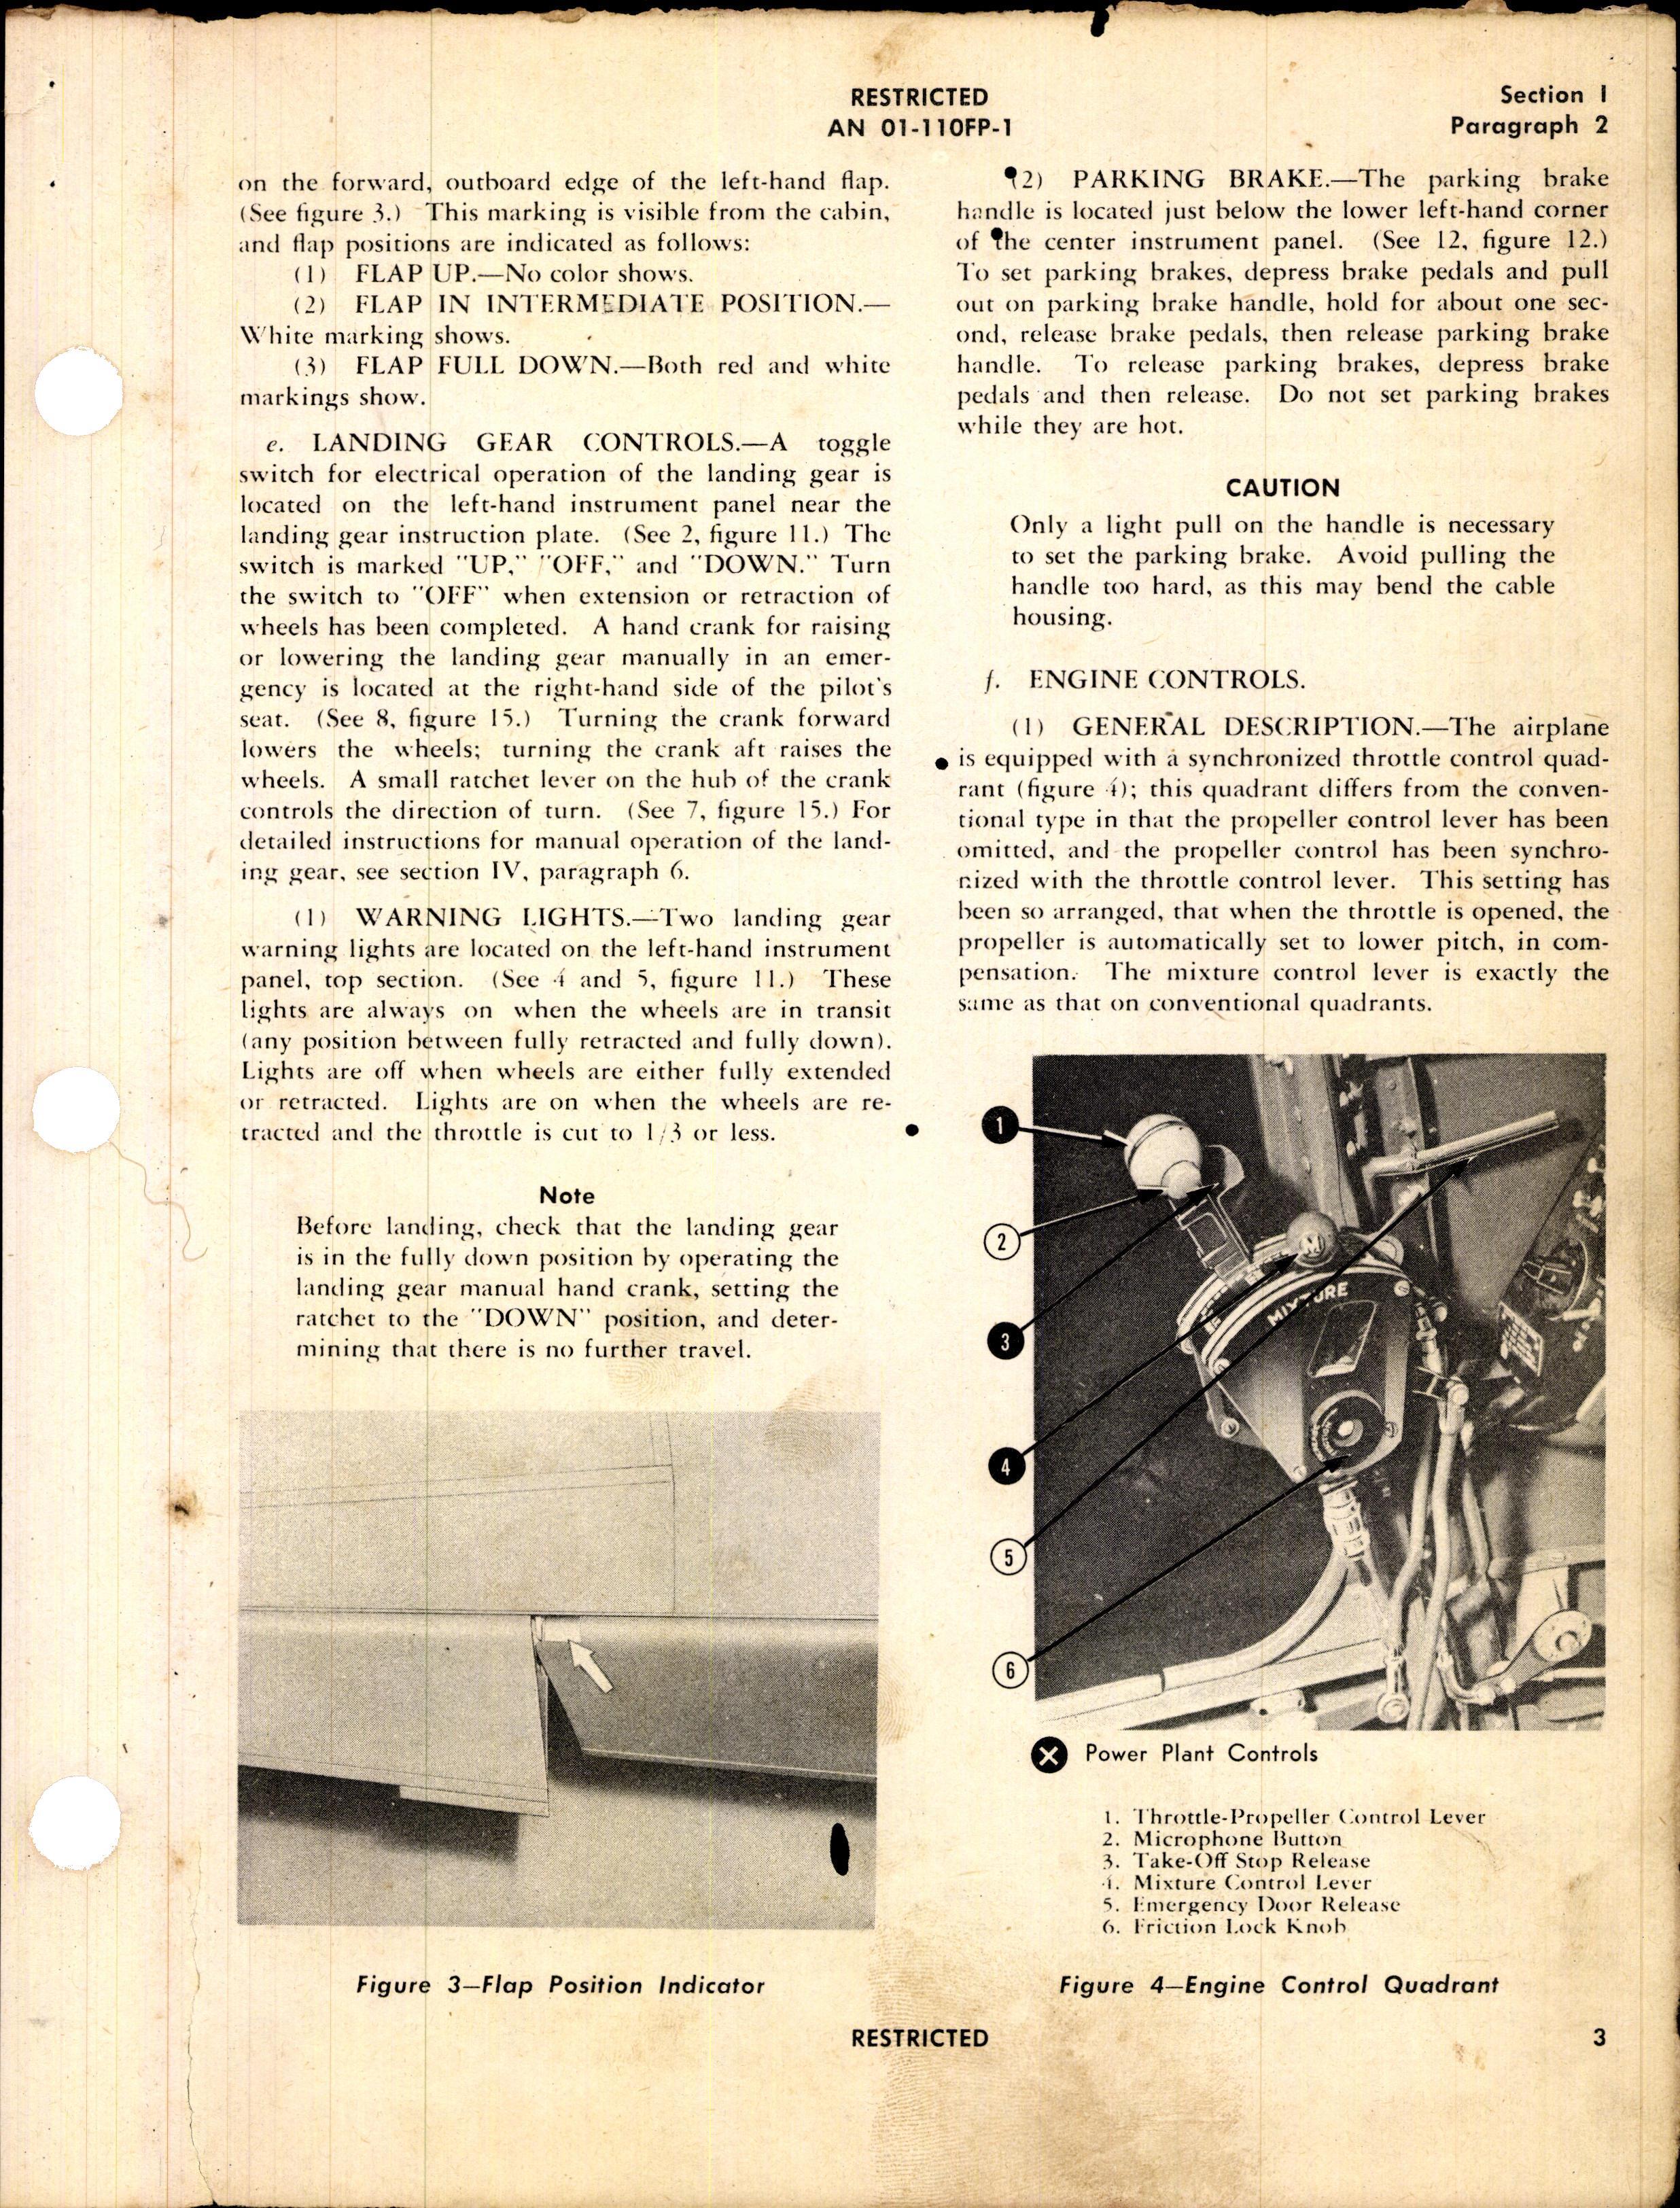 Sample page 7 from AirCorps Library document: Pilot's Handbook for RP-63G-1